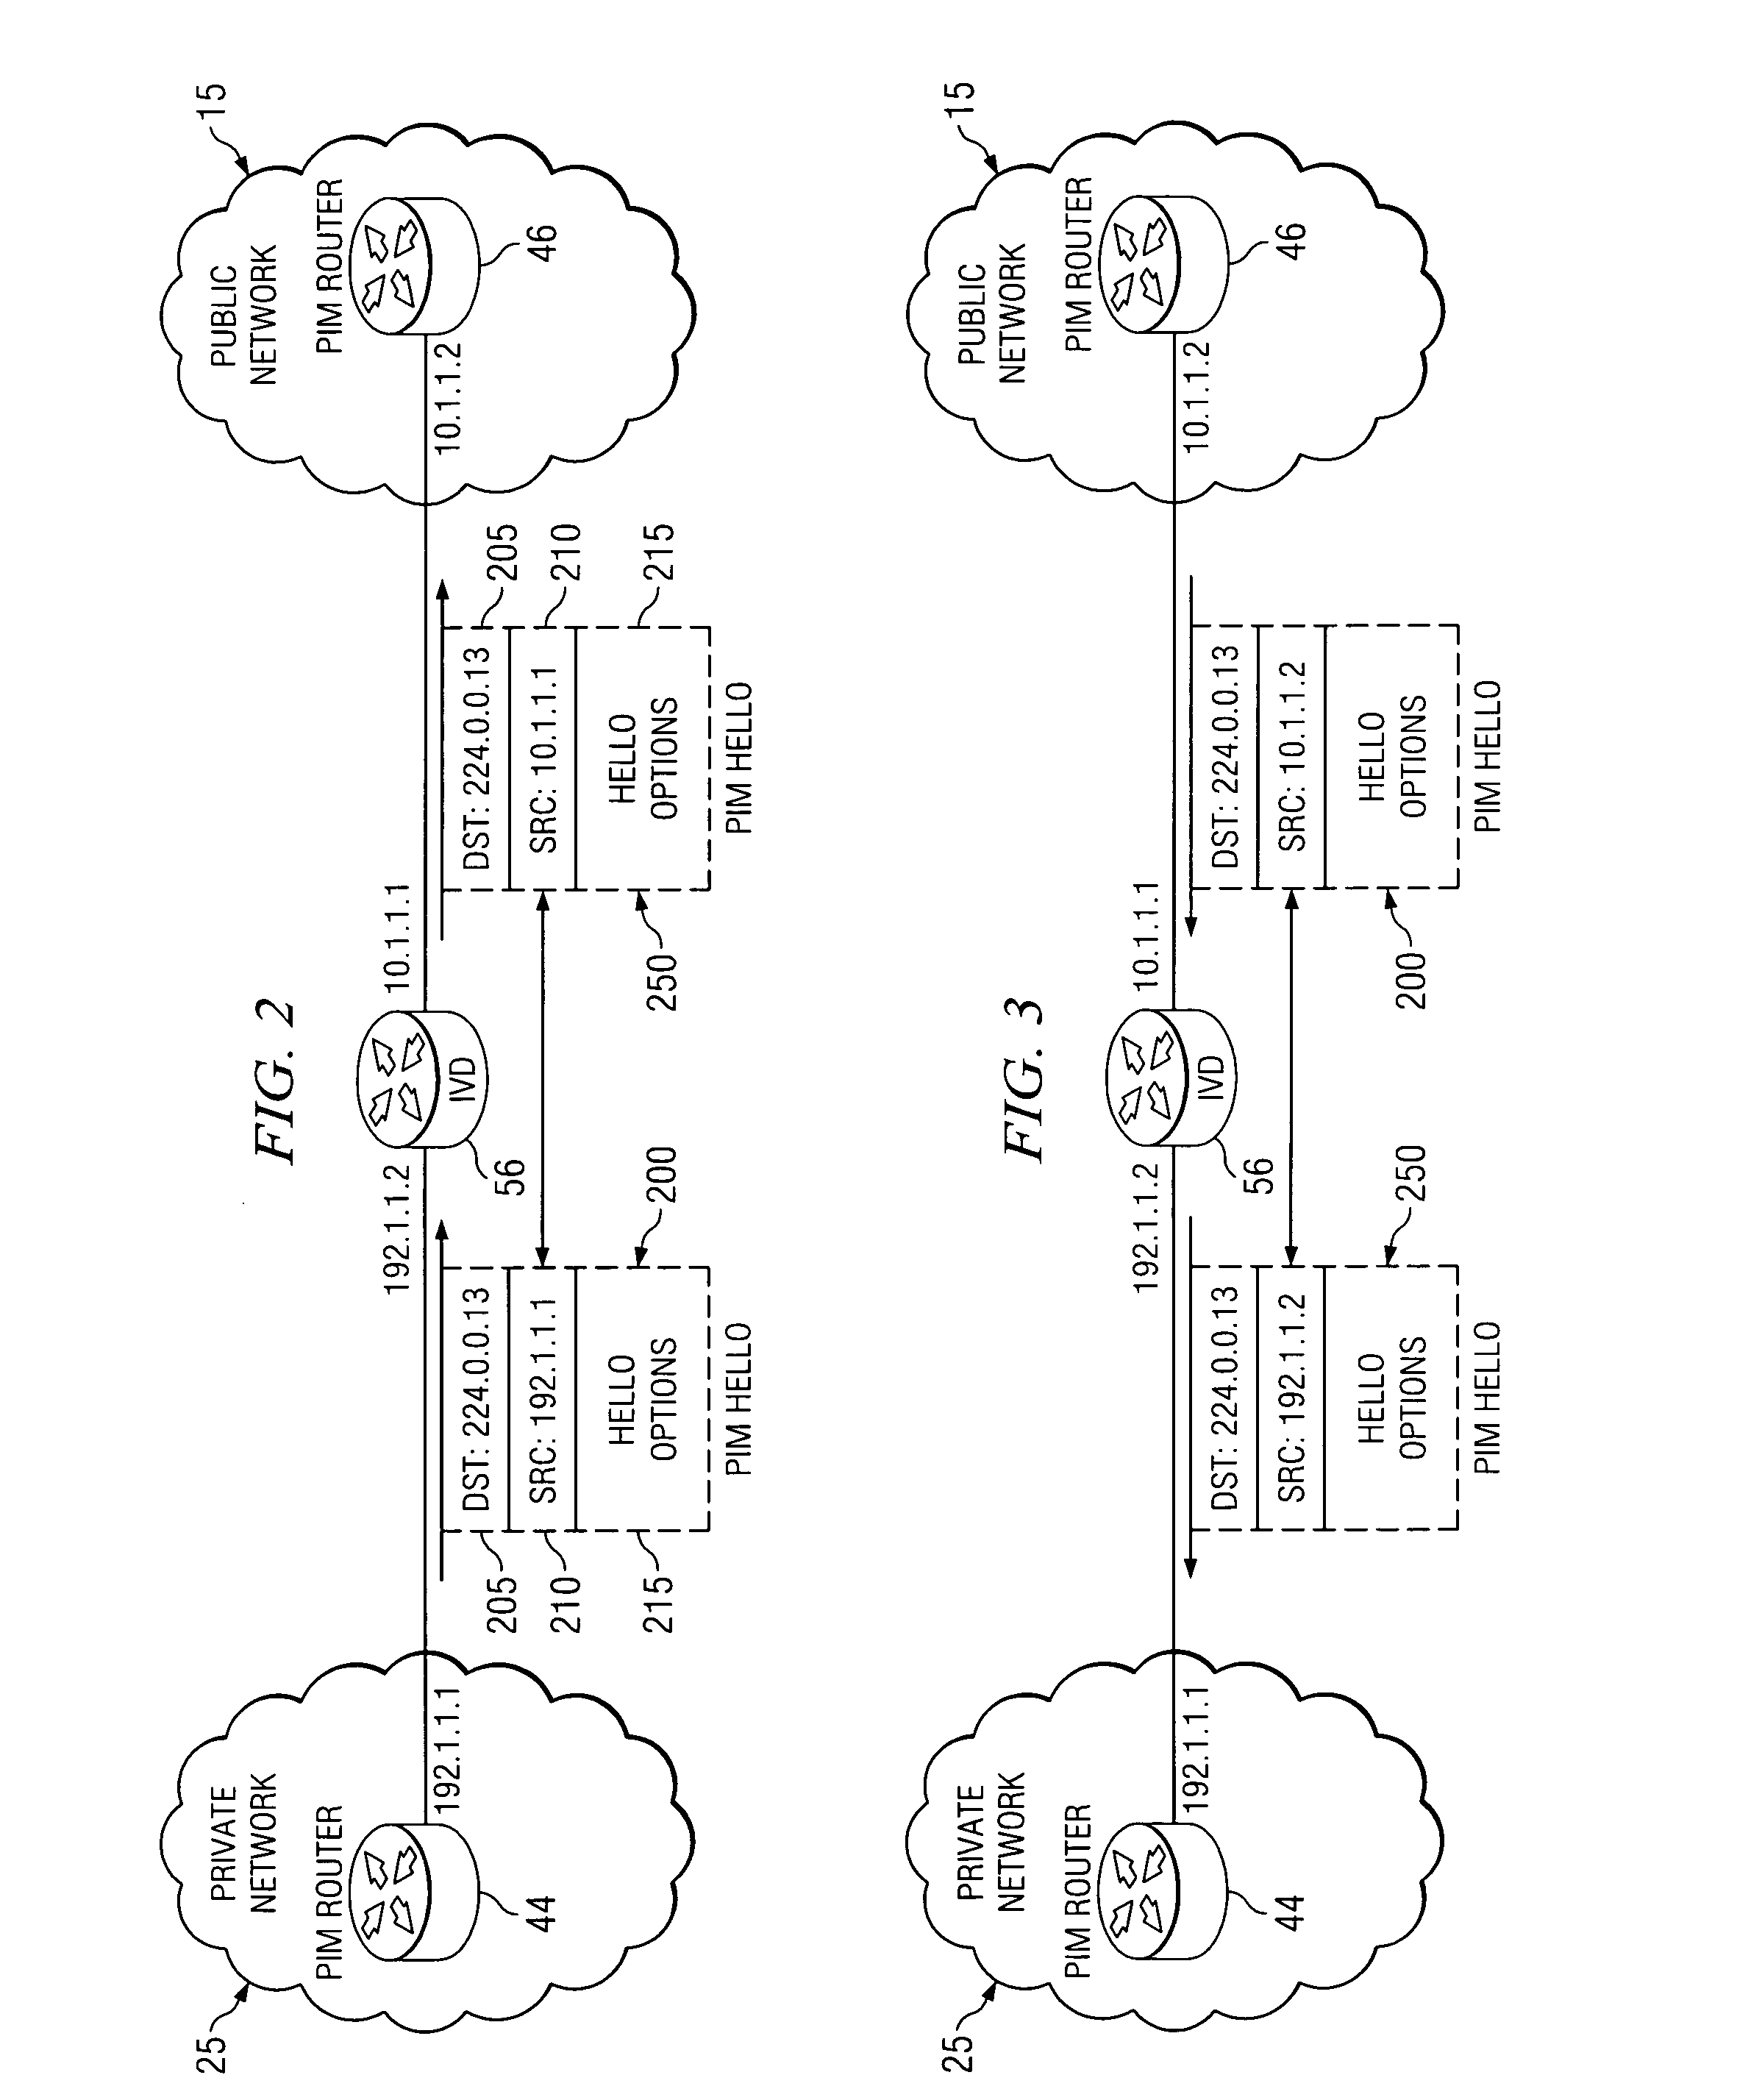 System and method for providing secure multicasting across virtual private networks